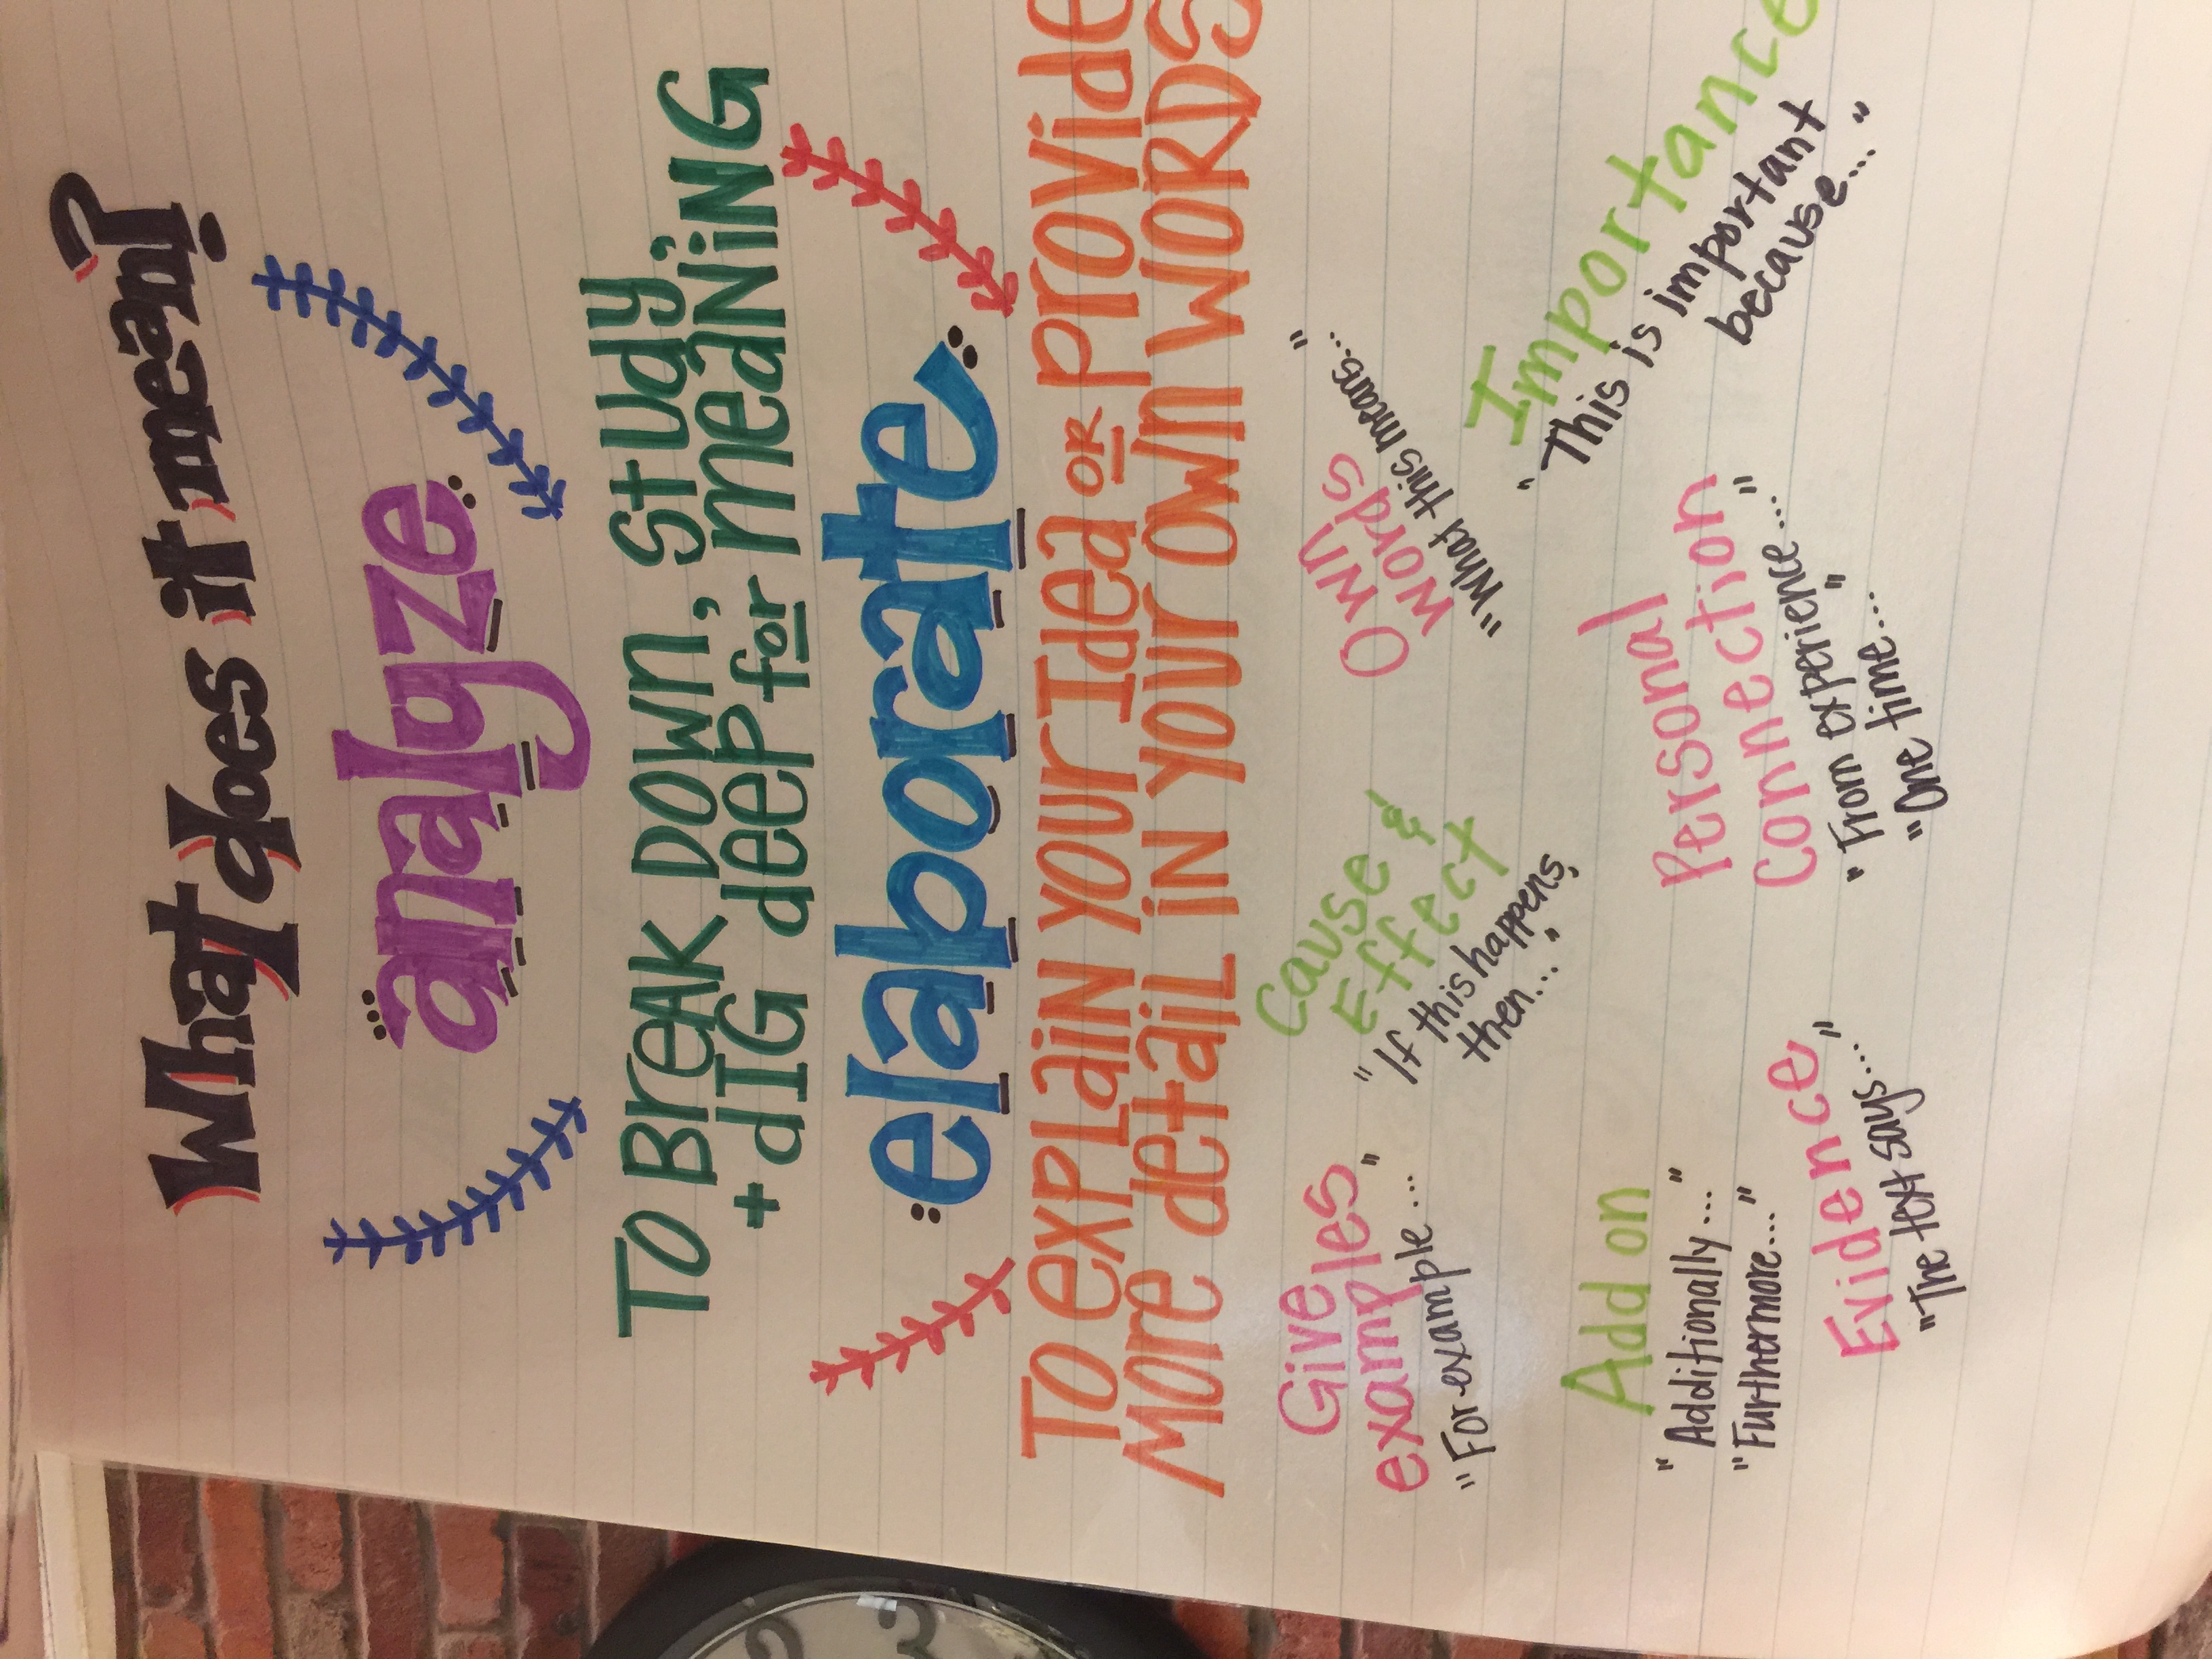 Using Anchor Charts in Middle and High School: Why and How